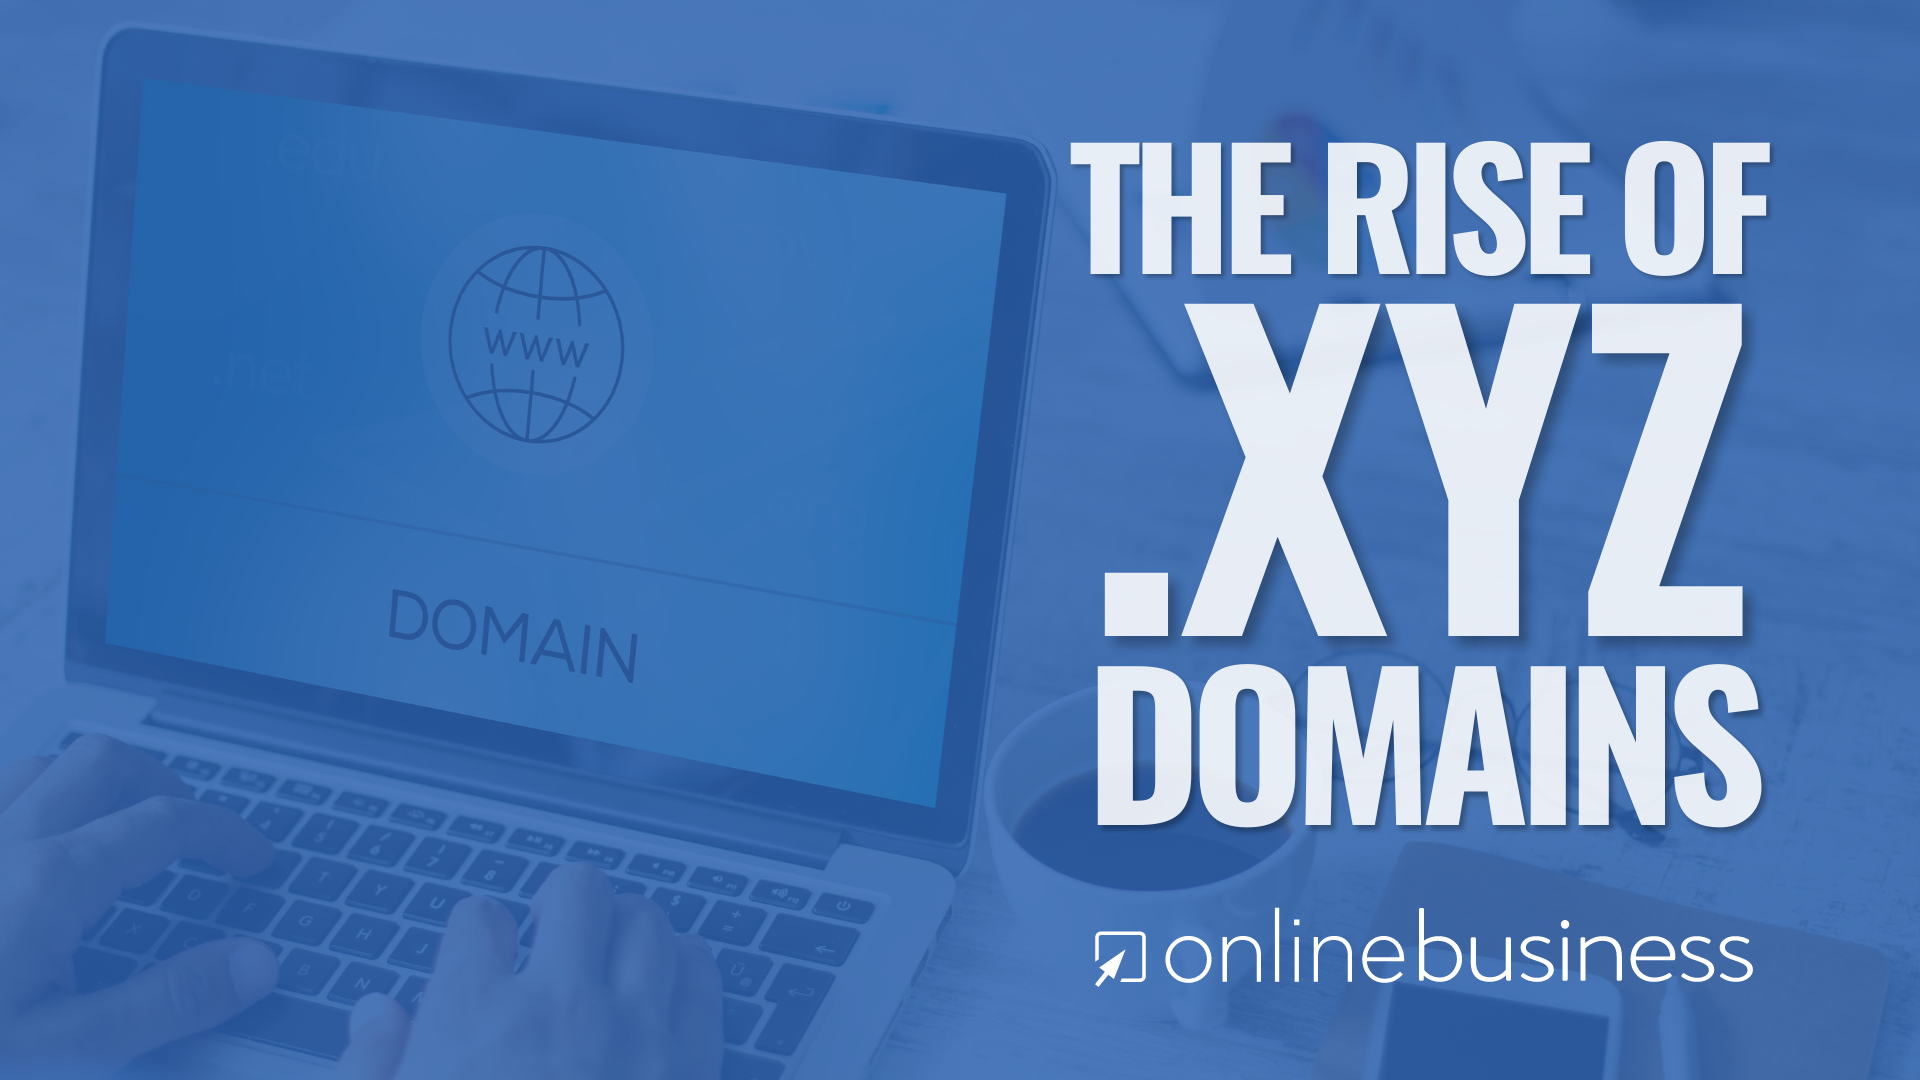 OnlineBusiness.com Founder Provides Insights on The Rise of .xyz Domains